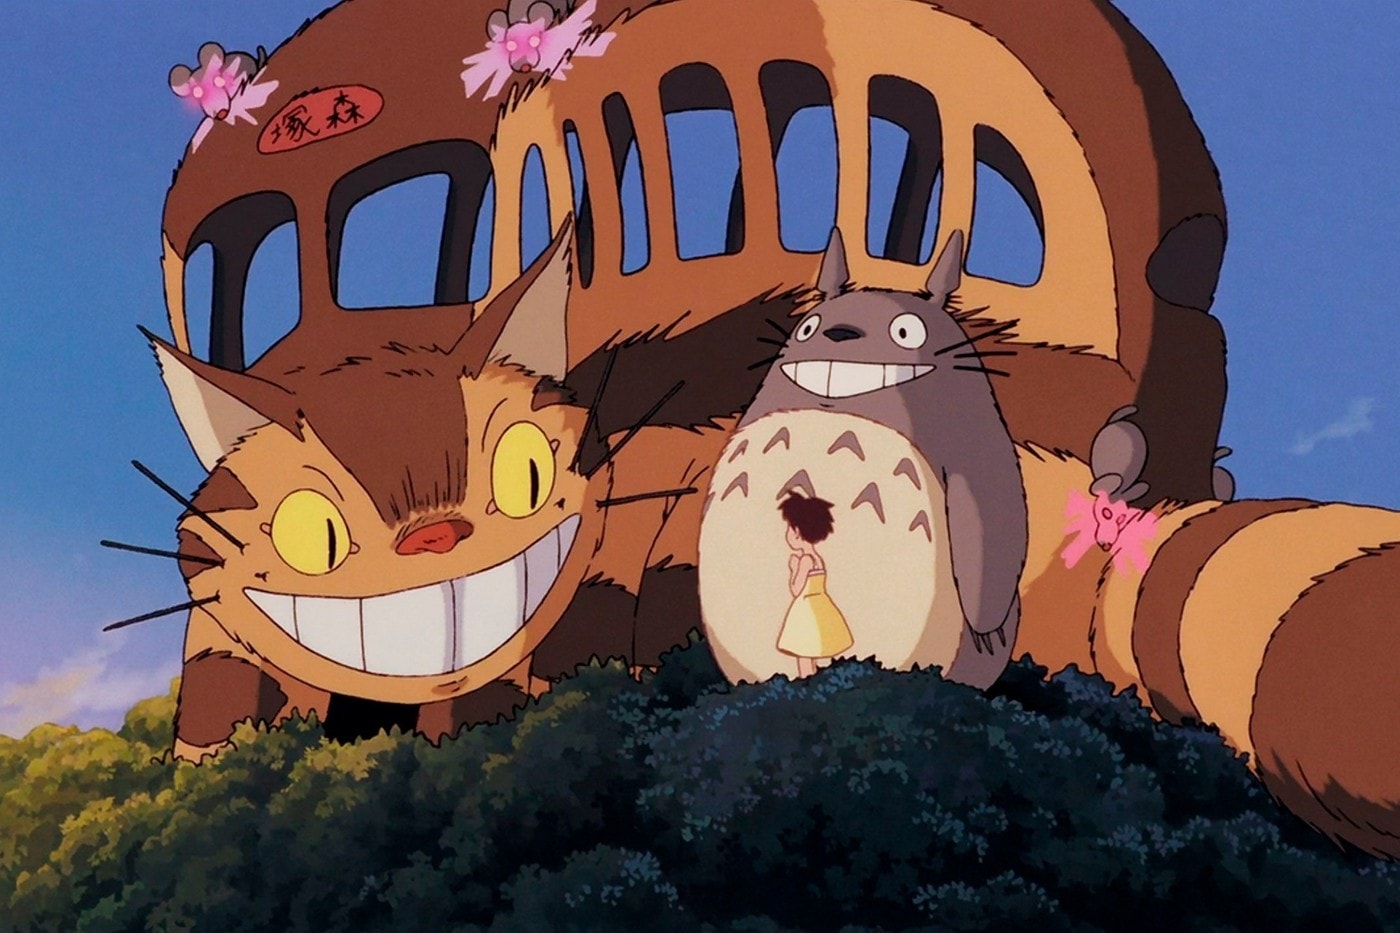 ghibli park toyota are developing a ridable catbus